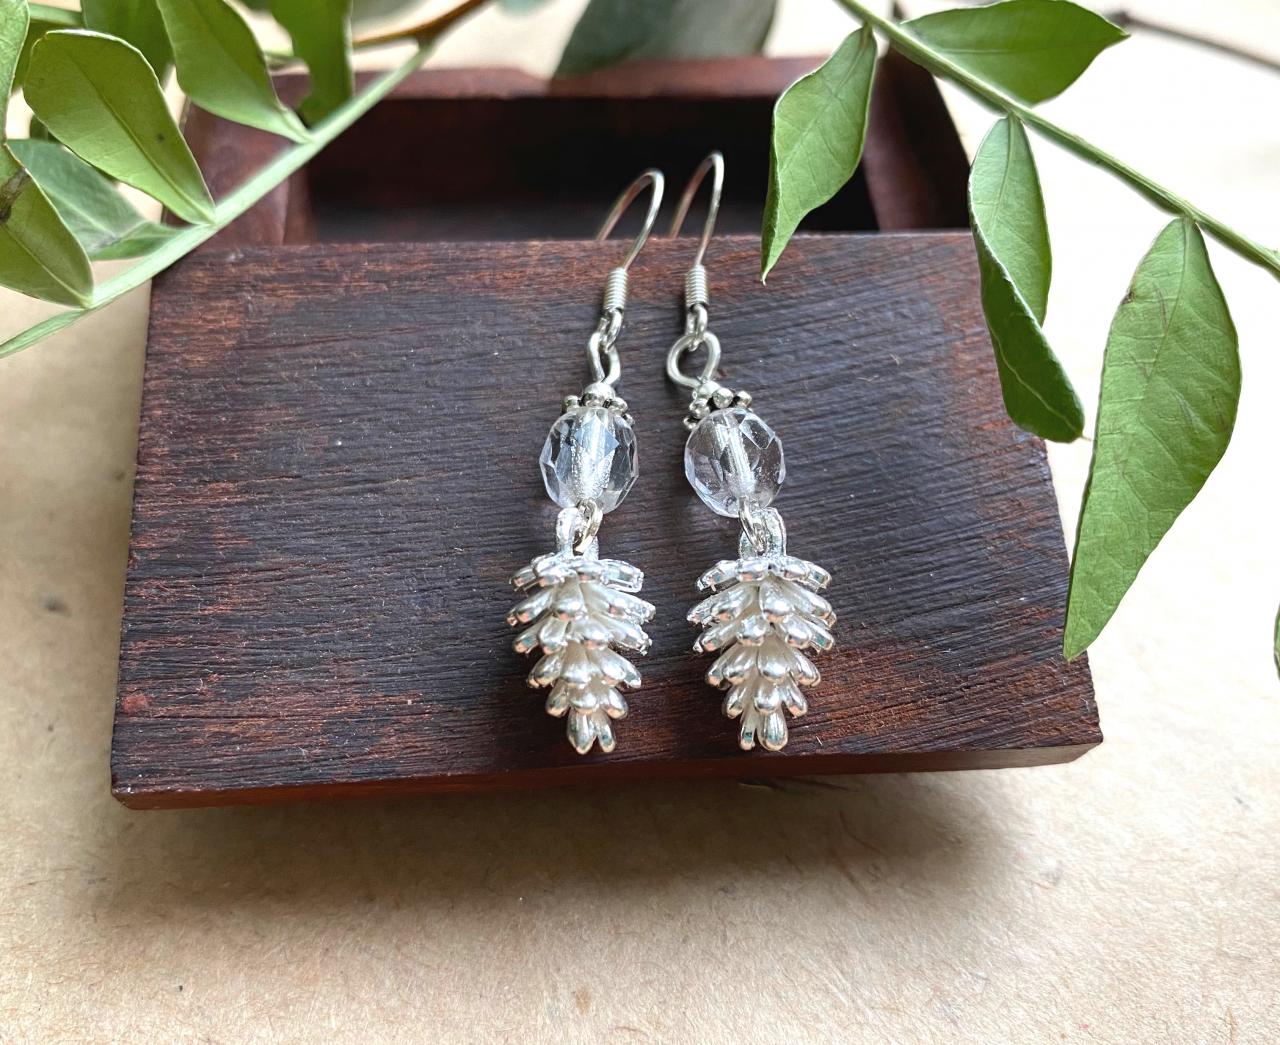 Silver Pine Cone Earrings With Clear Glass Beads And Sterling Silver Hooks, Selma Dreams